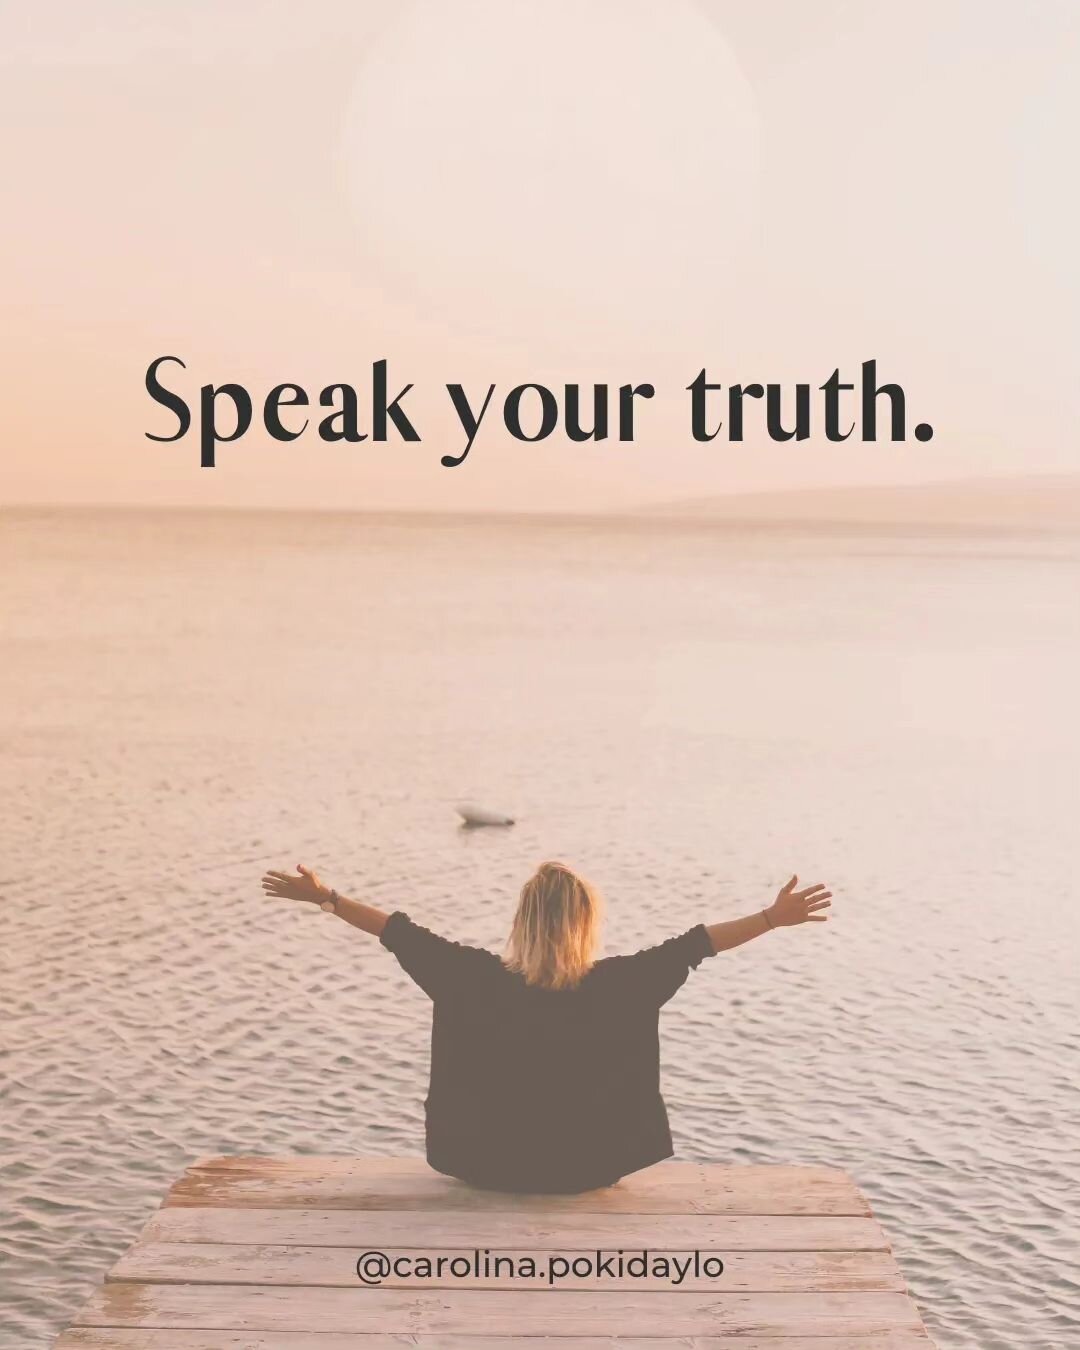 ✨Speak your truth. ✨

As female entrepreneurs, often we&rsquo;re expected to fall into line with old-world sales tactics and masculine management and financial tactics. 🙄

➡️It&rsquo;s time to step away from what makes you uncomfortable. 

Connect i